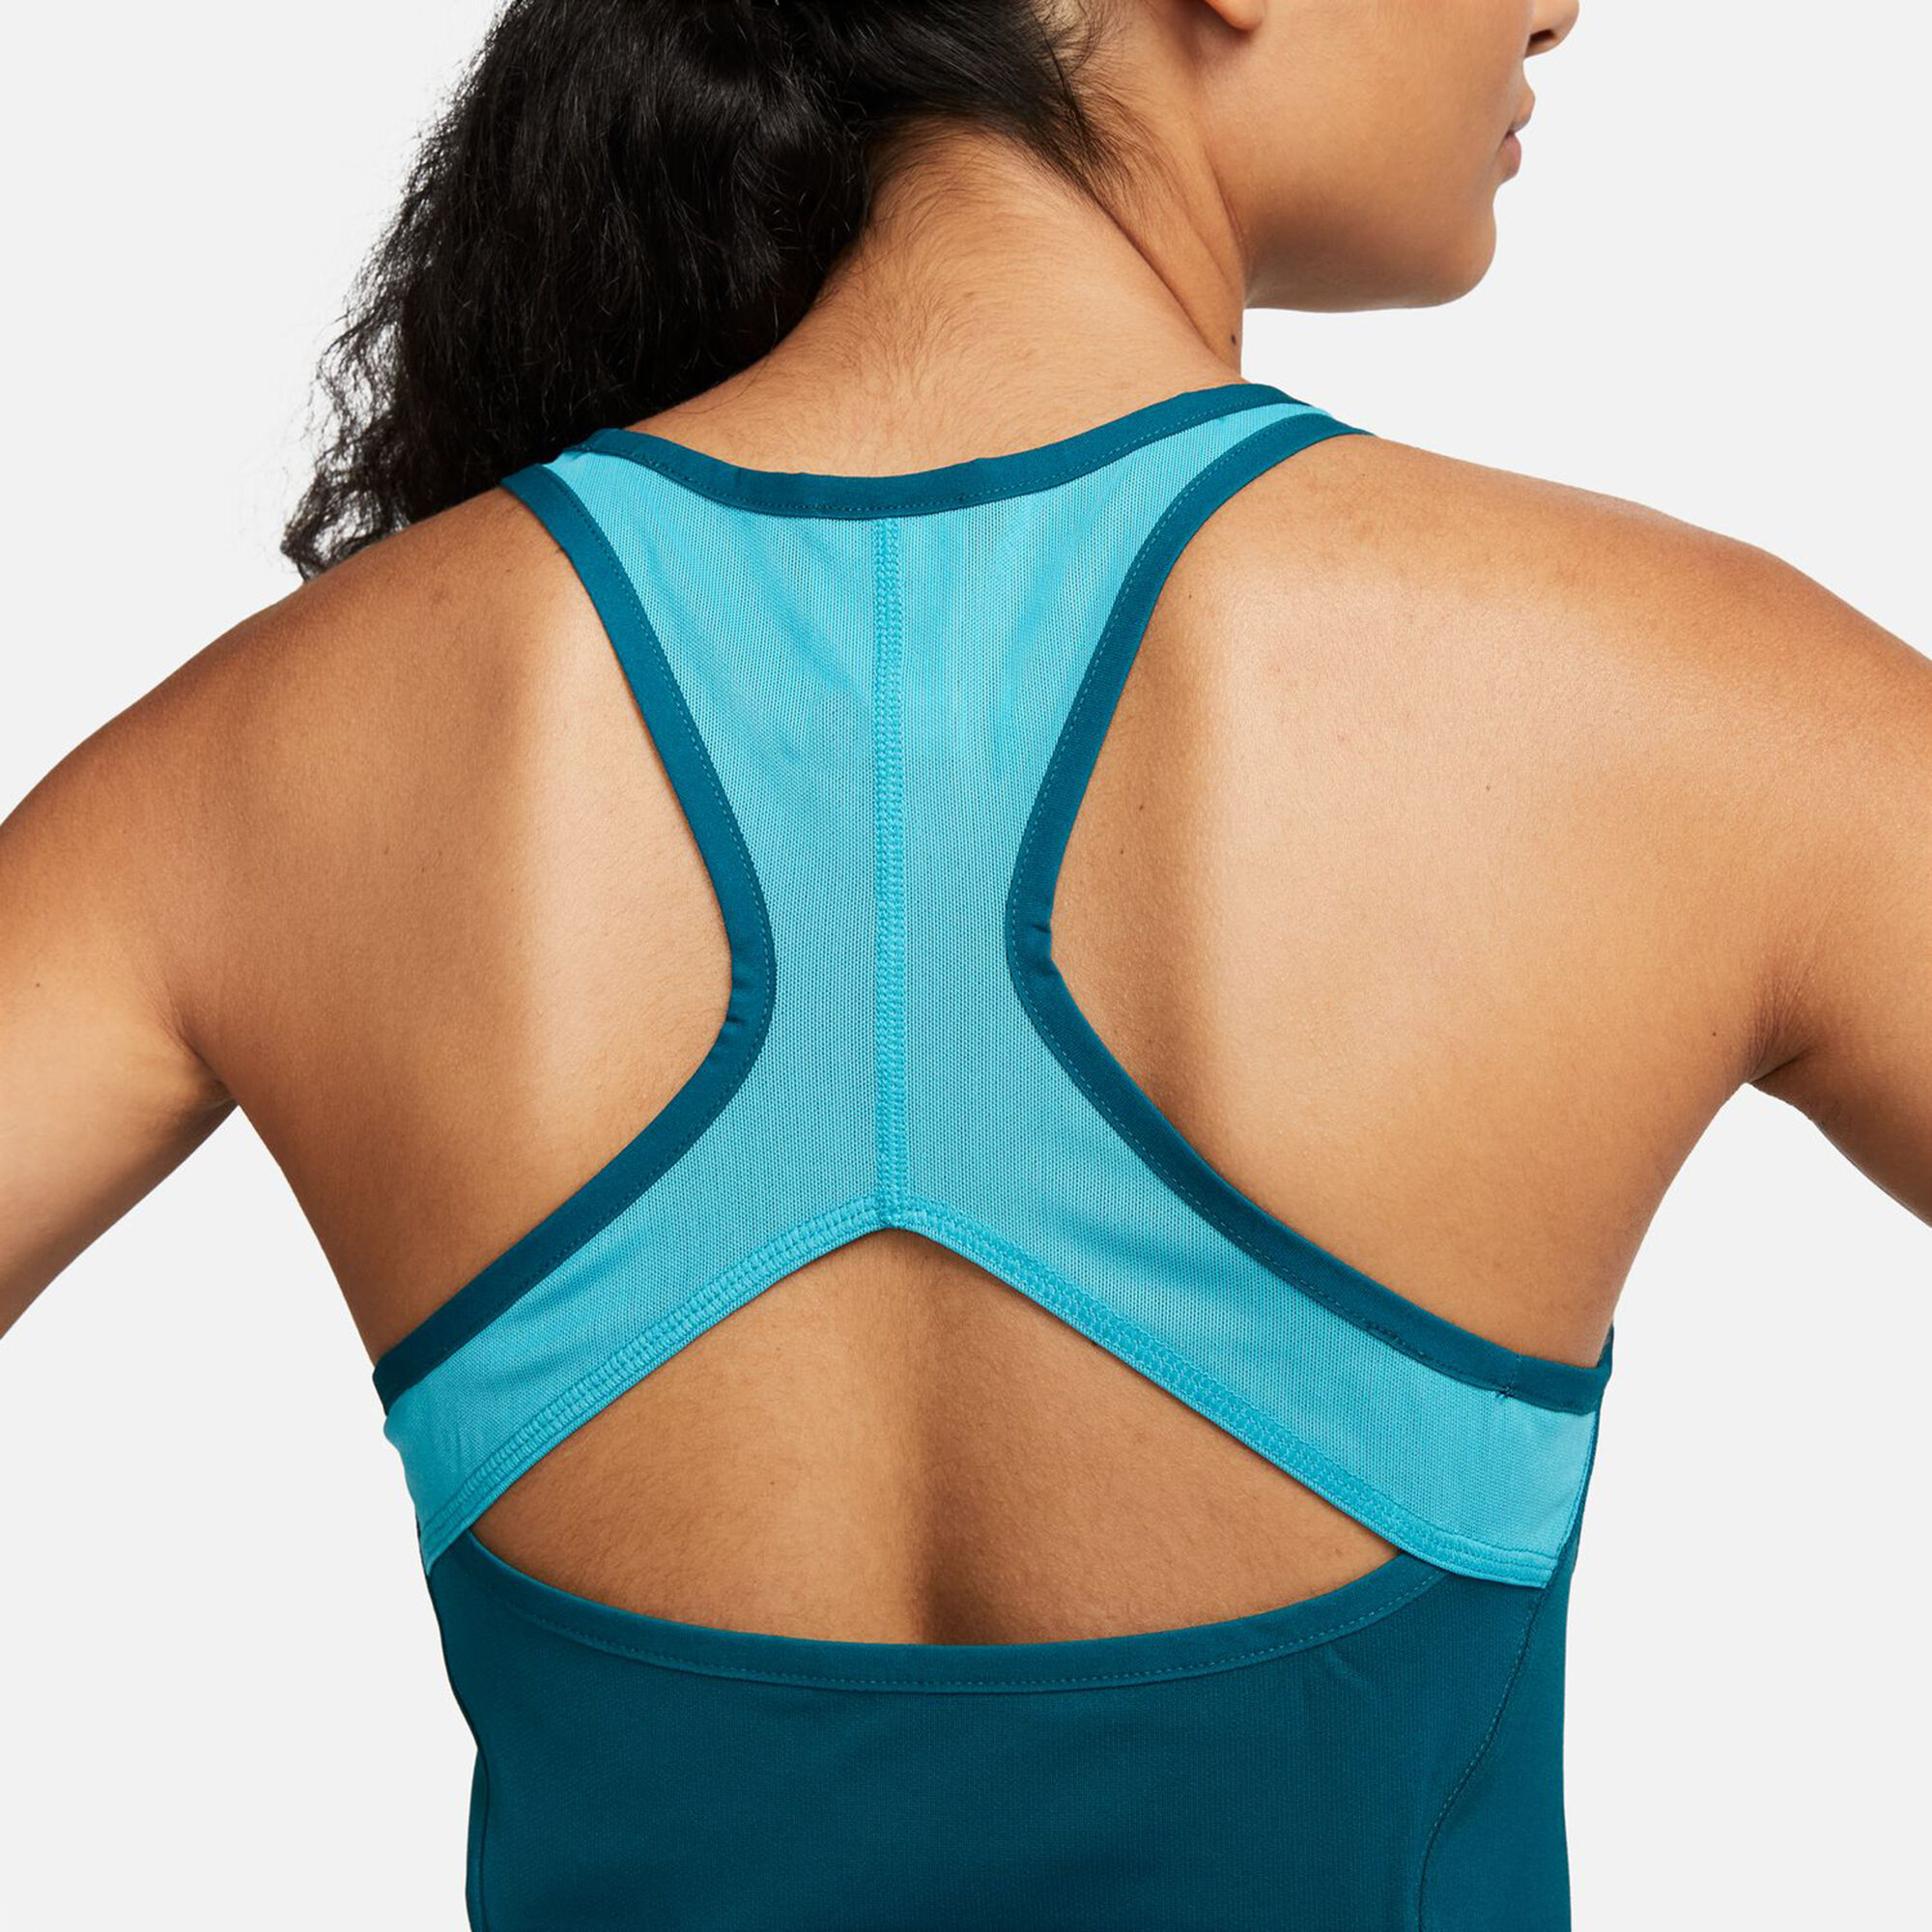 Nike Dri-Fit Tank Top Womens S Turquoise Built-In Bra Vented Workout  Running